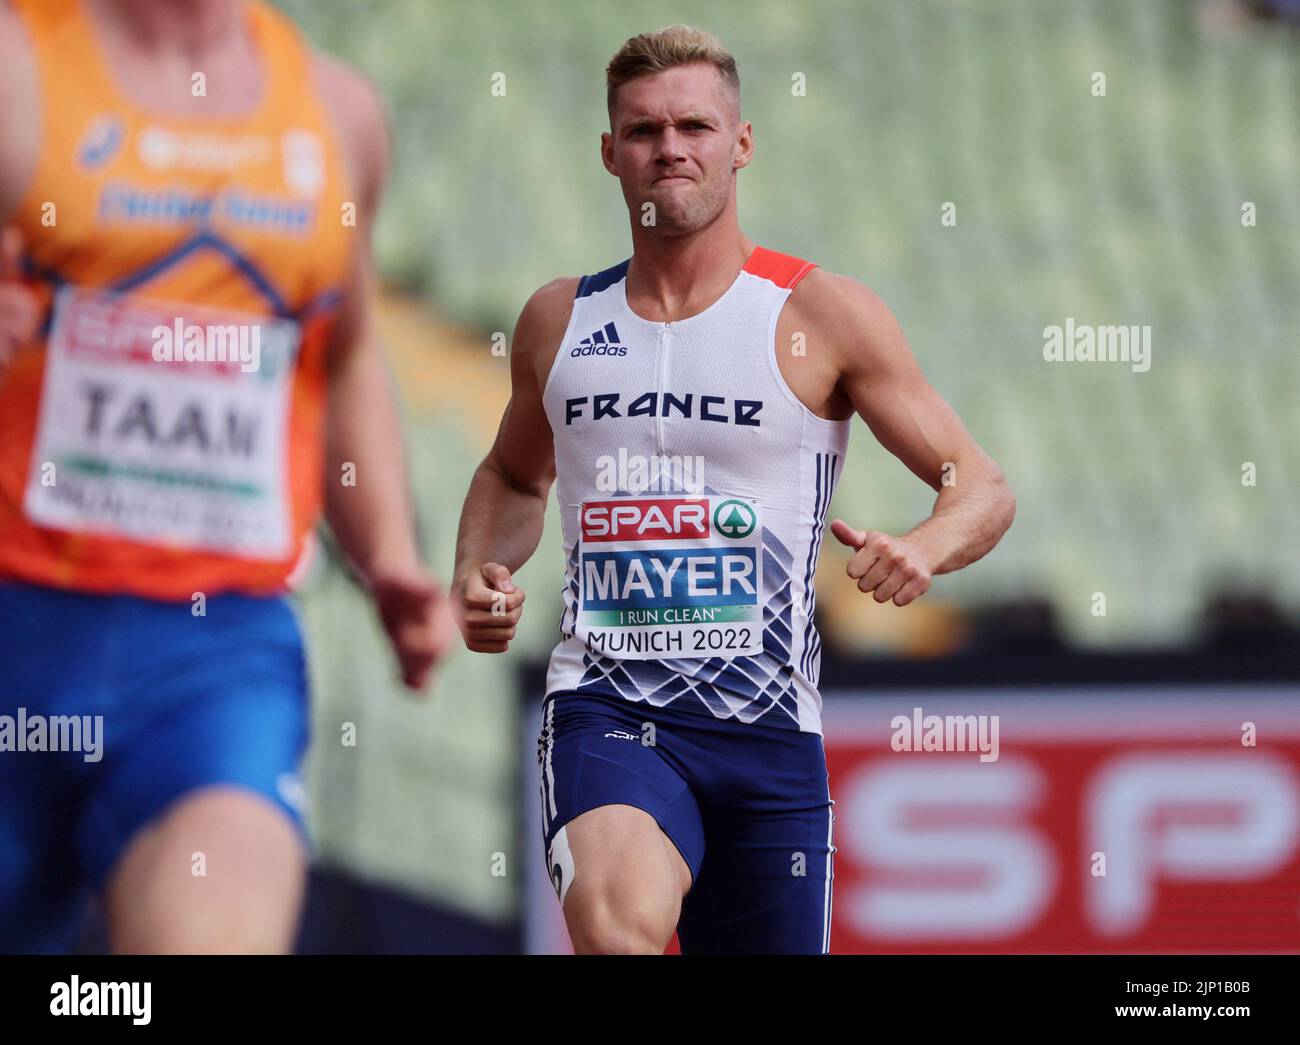 Athletics - 2022 European Championships - Olympiastadion, Munich, Germany - August 15, 2022 France's Kevin Mayer sustains an injury during the Men's Decathlon 100m - Heats REUTERS/Wolfgang Rattay Stock Photo